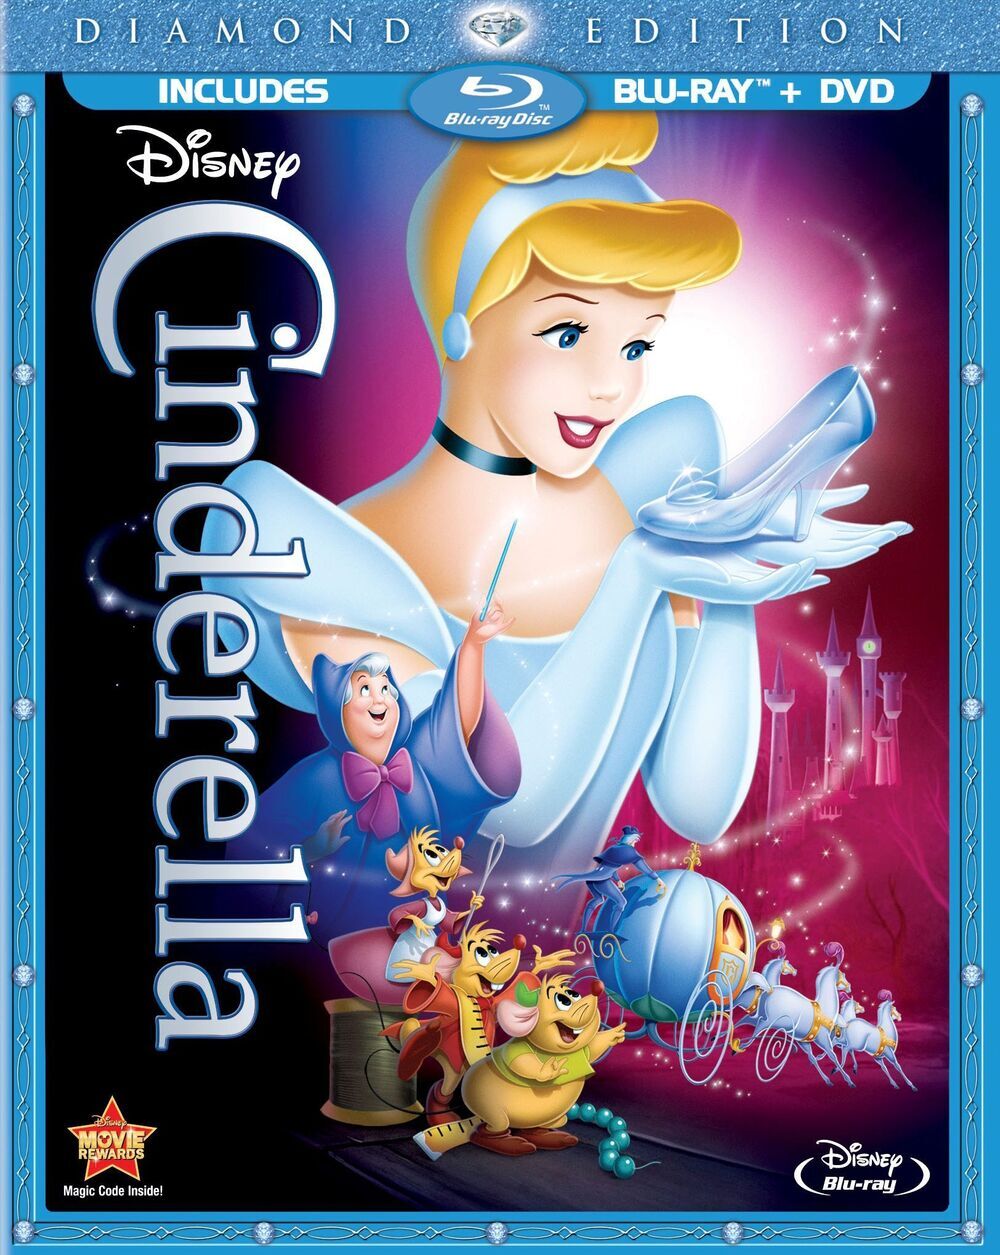 In Cinderella (1950), only one girl in the whole kingdom has the